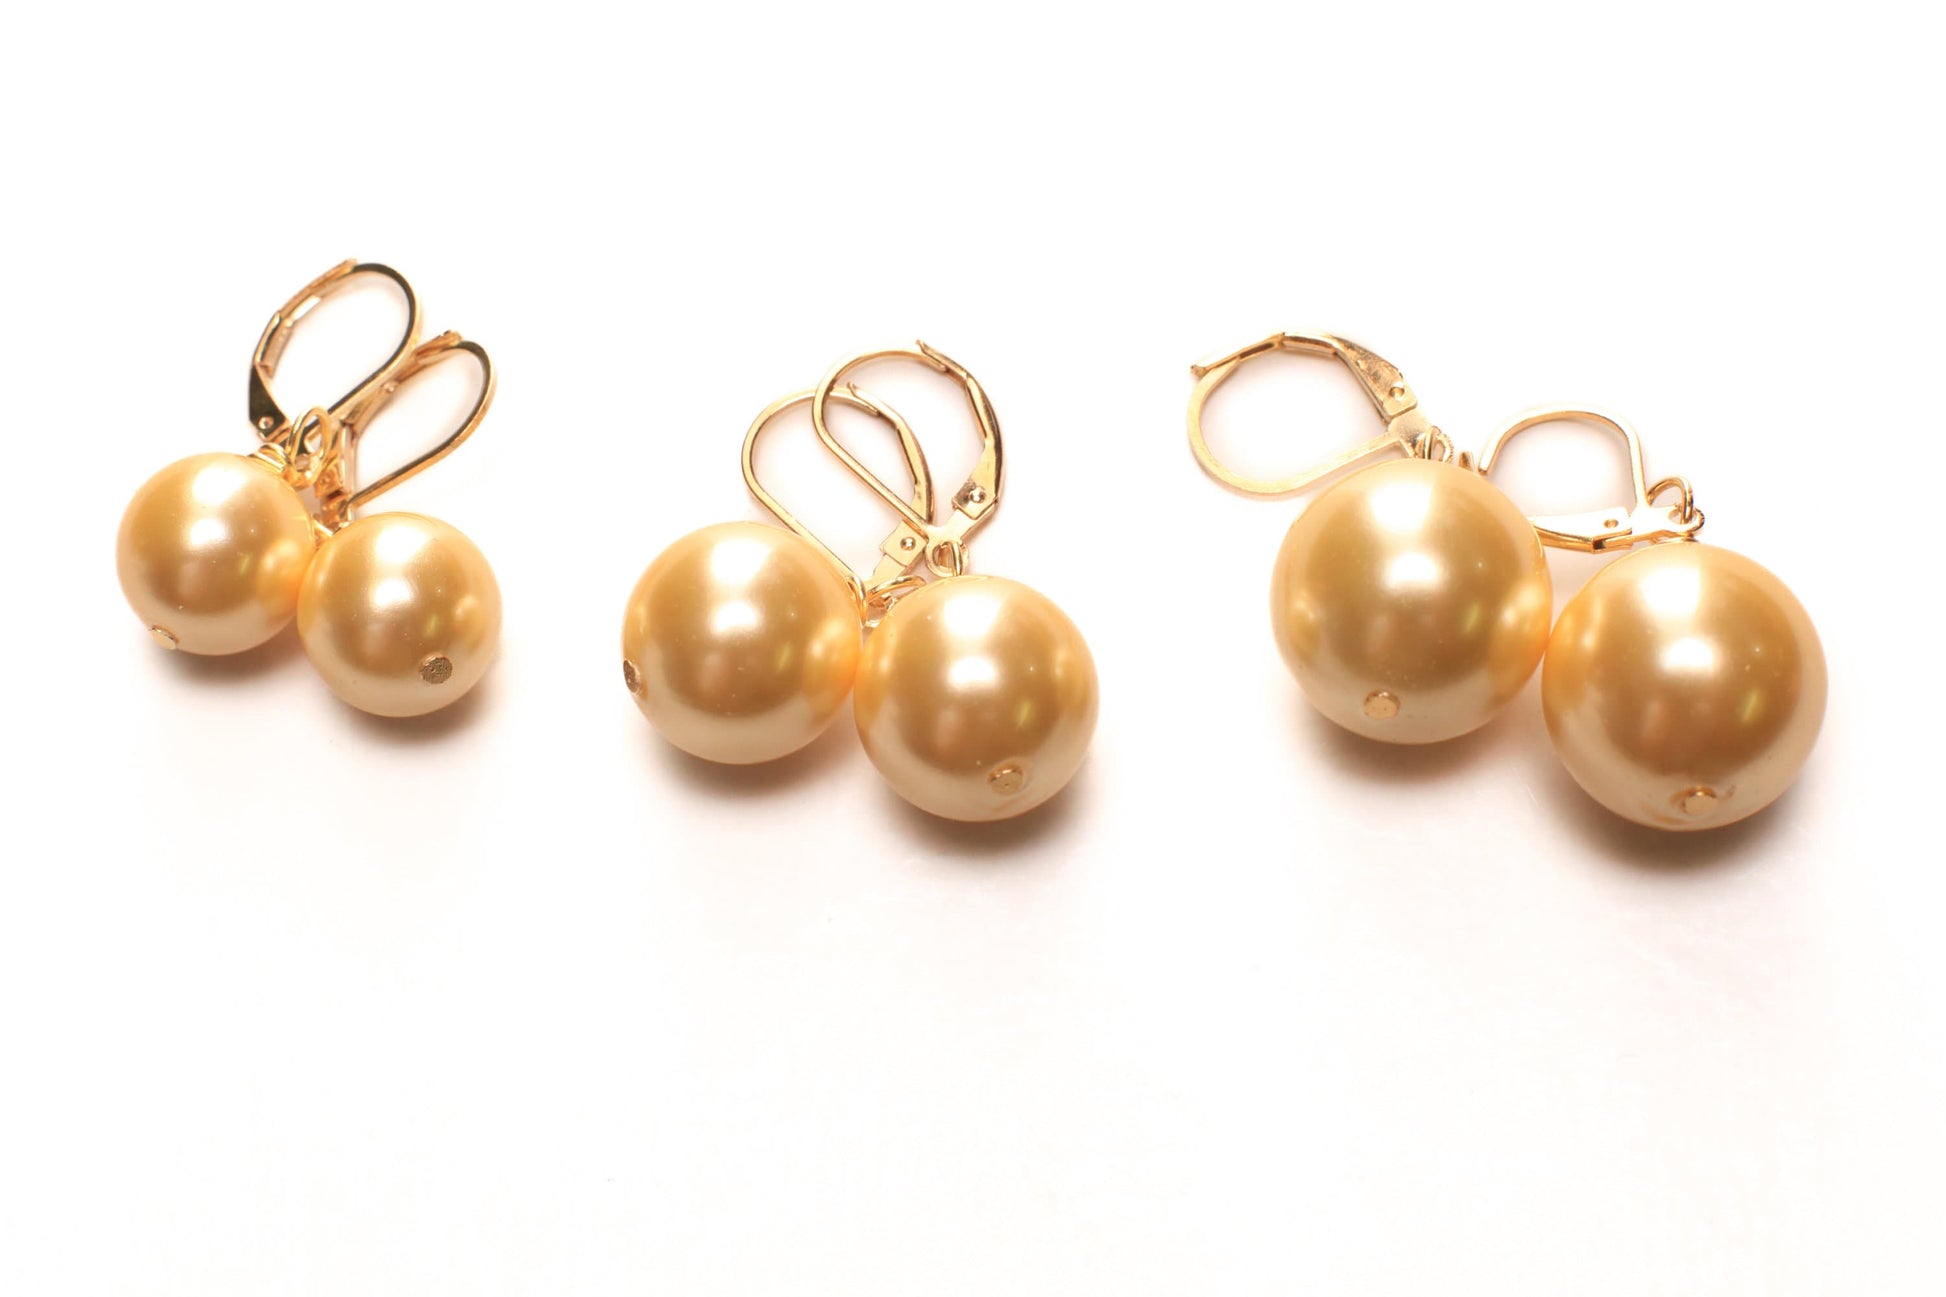 Golden Yellow South Sea Shell Pearl 12, 14, 16mm Large High Luster in Gold Plated, 18K Gold Vermeil Leverback Earrings, Bridal, Gift for Her